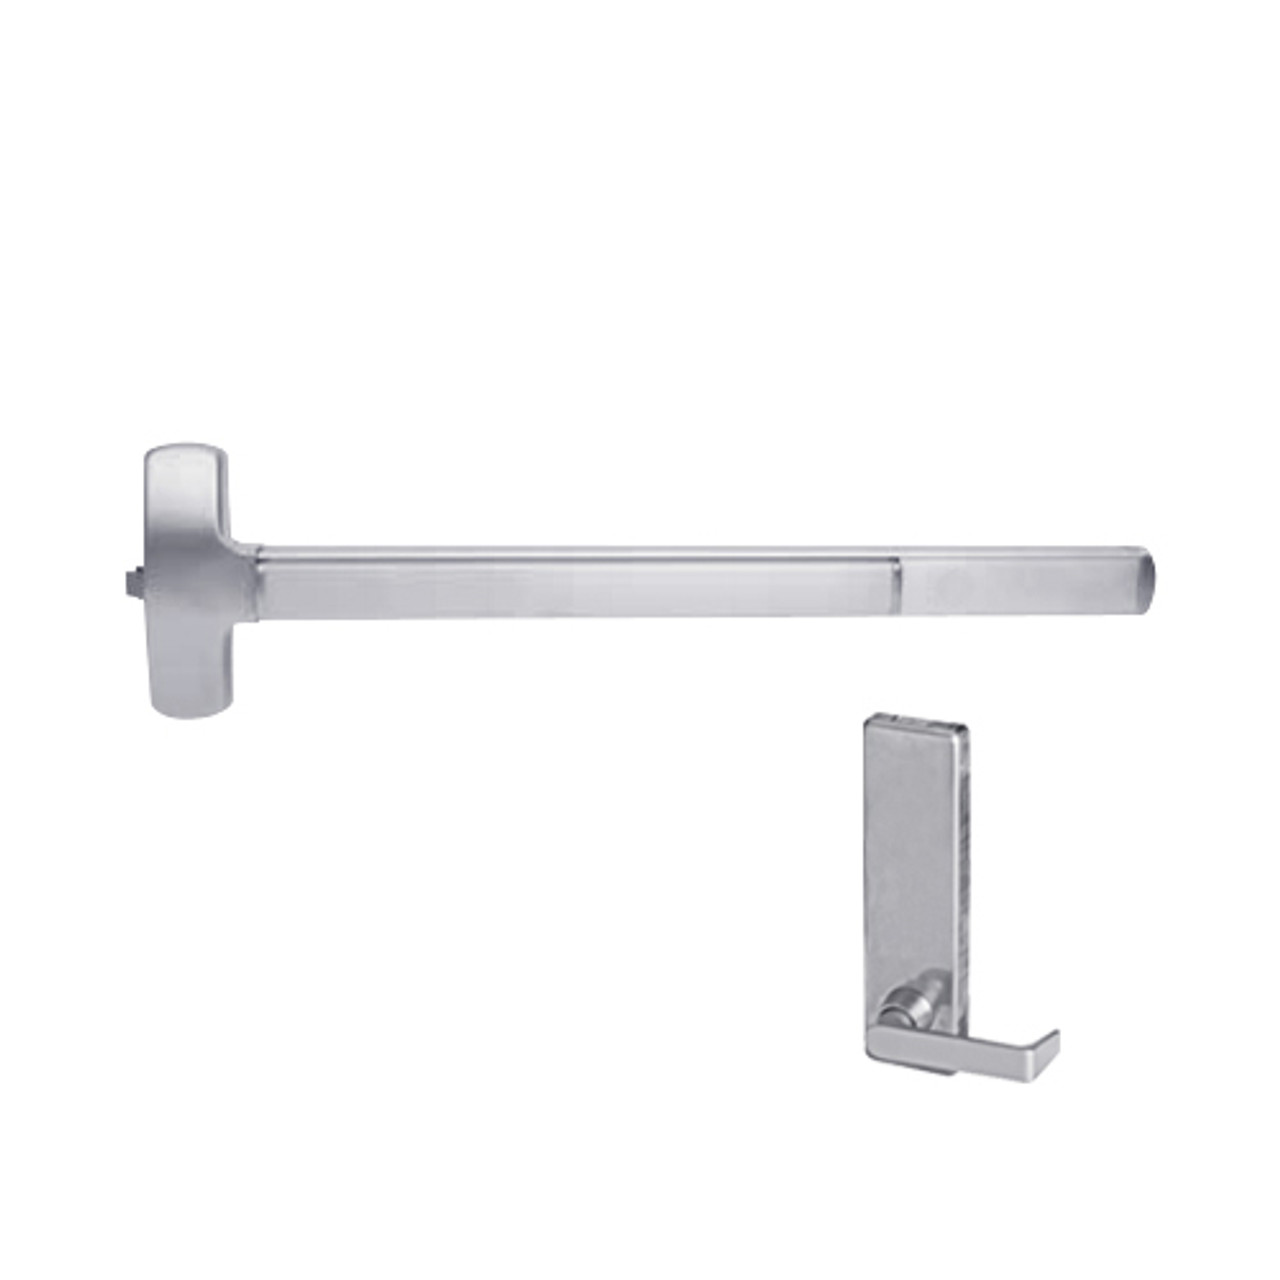 F-25-R-L-DT-DANE-US32-3-LHR Falcon Exit Device in Polished Stainless Steel